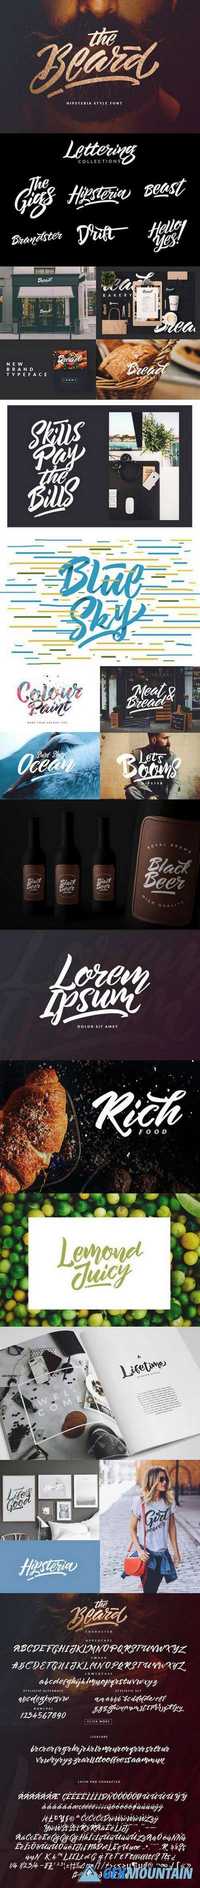 The Beard - Branded Typeface + Extras